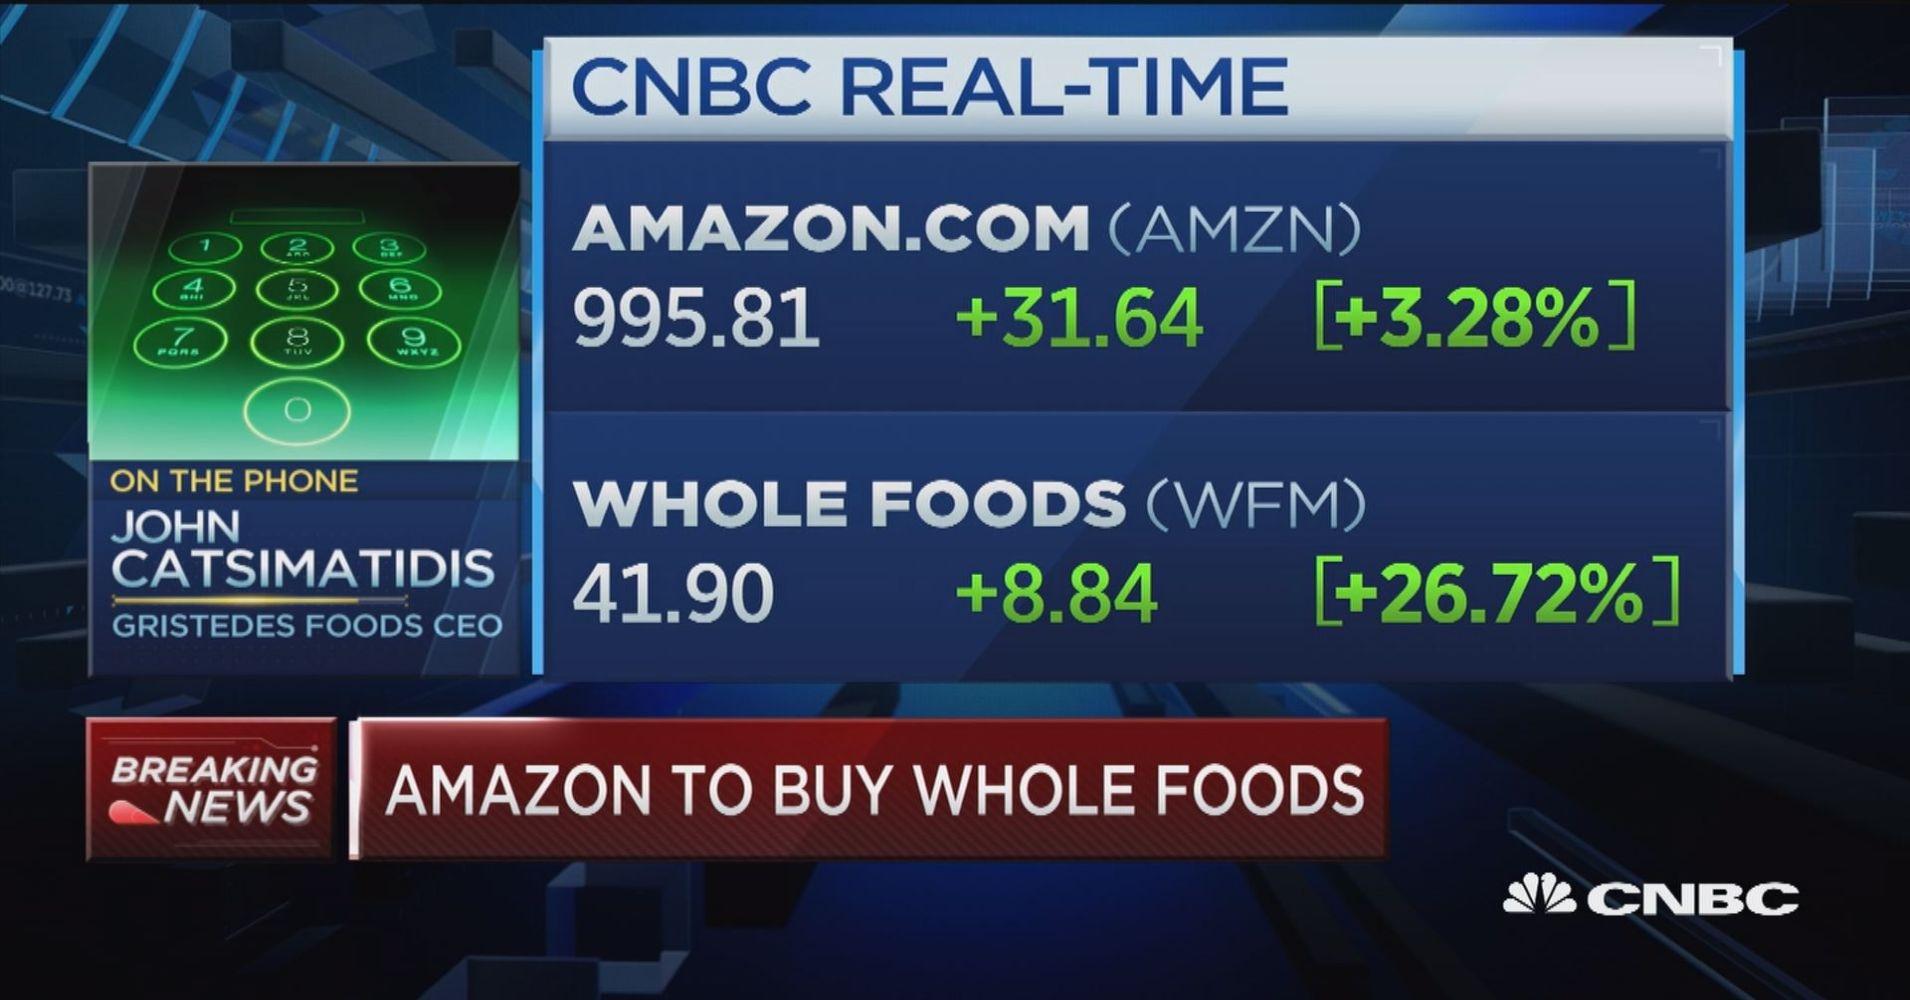 Gristedes Logo - Gristedes Foods CEO: This is a home run for Amazon, here's why